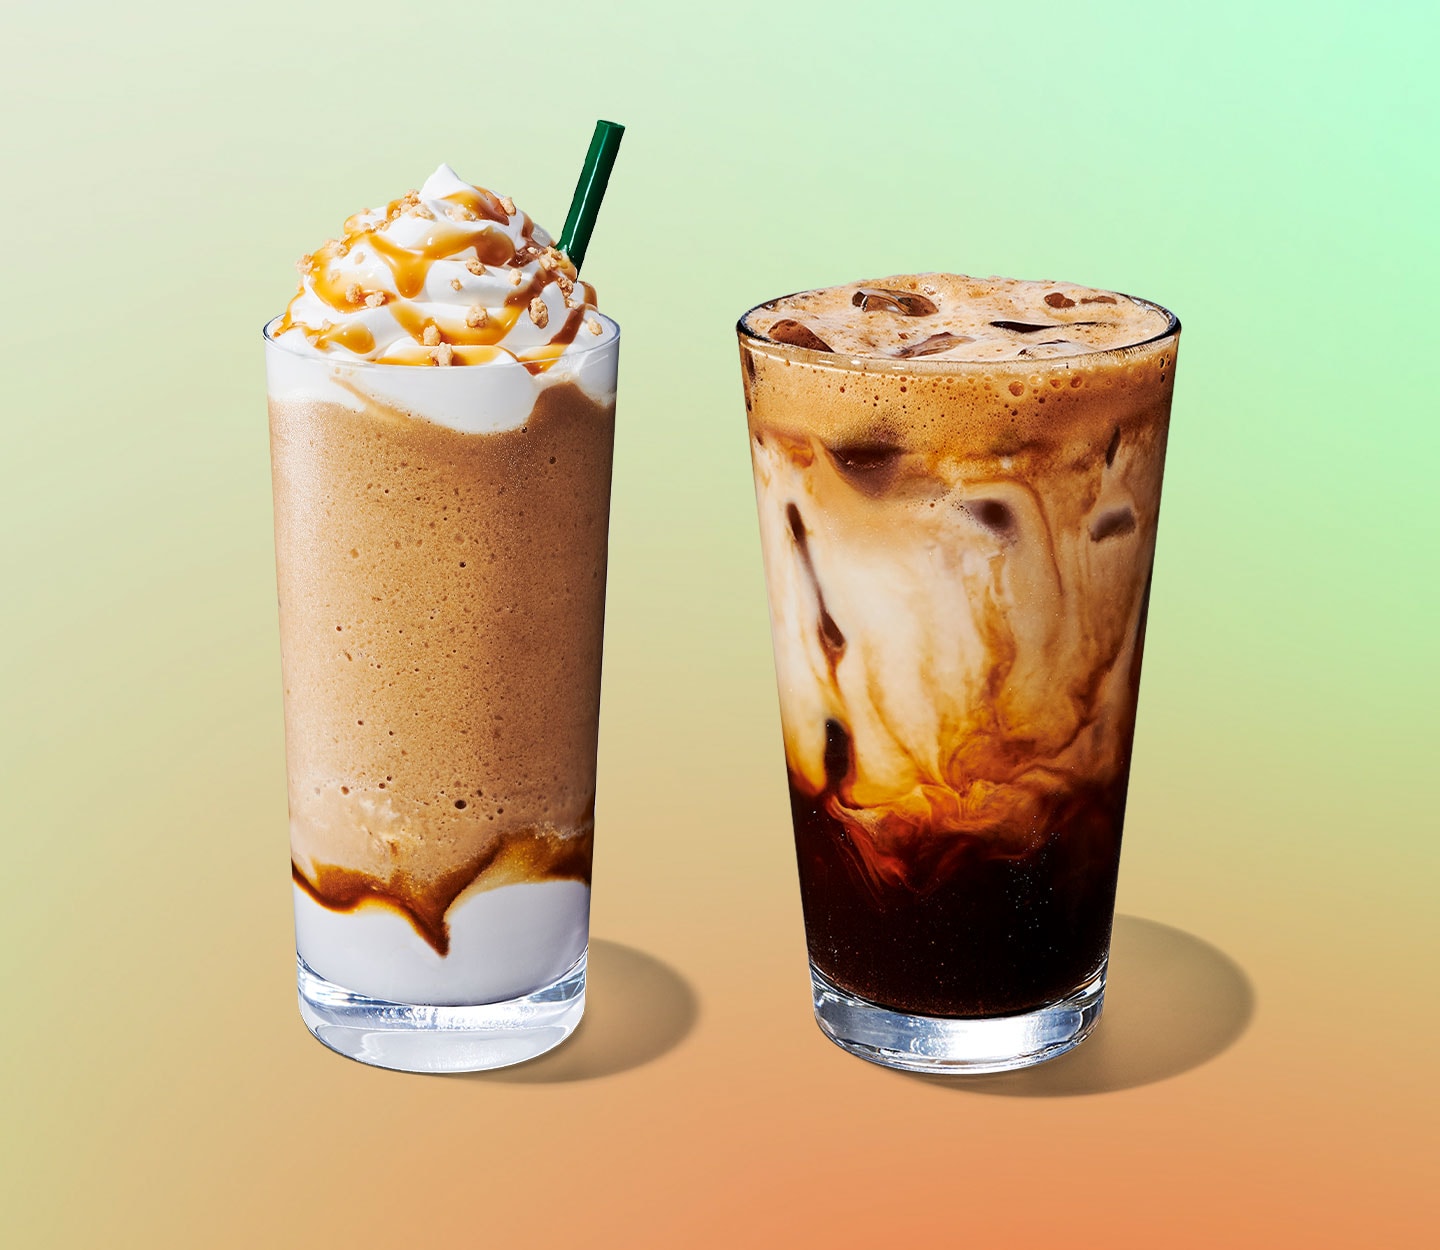 A blended coffee drink with whipped cream and a creamy iced coffee drink.